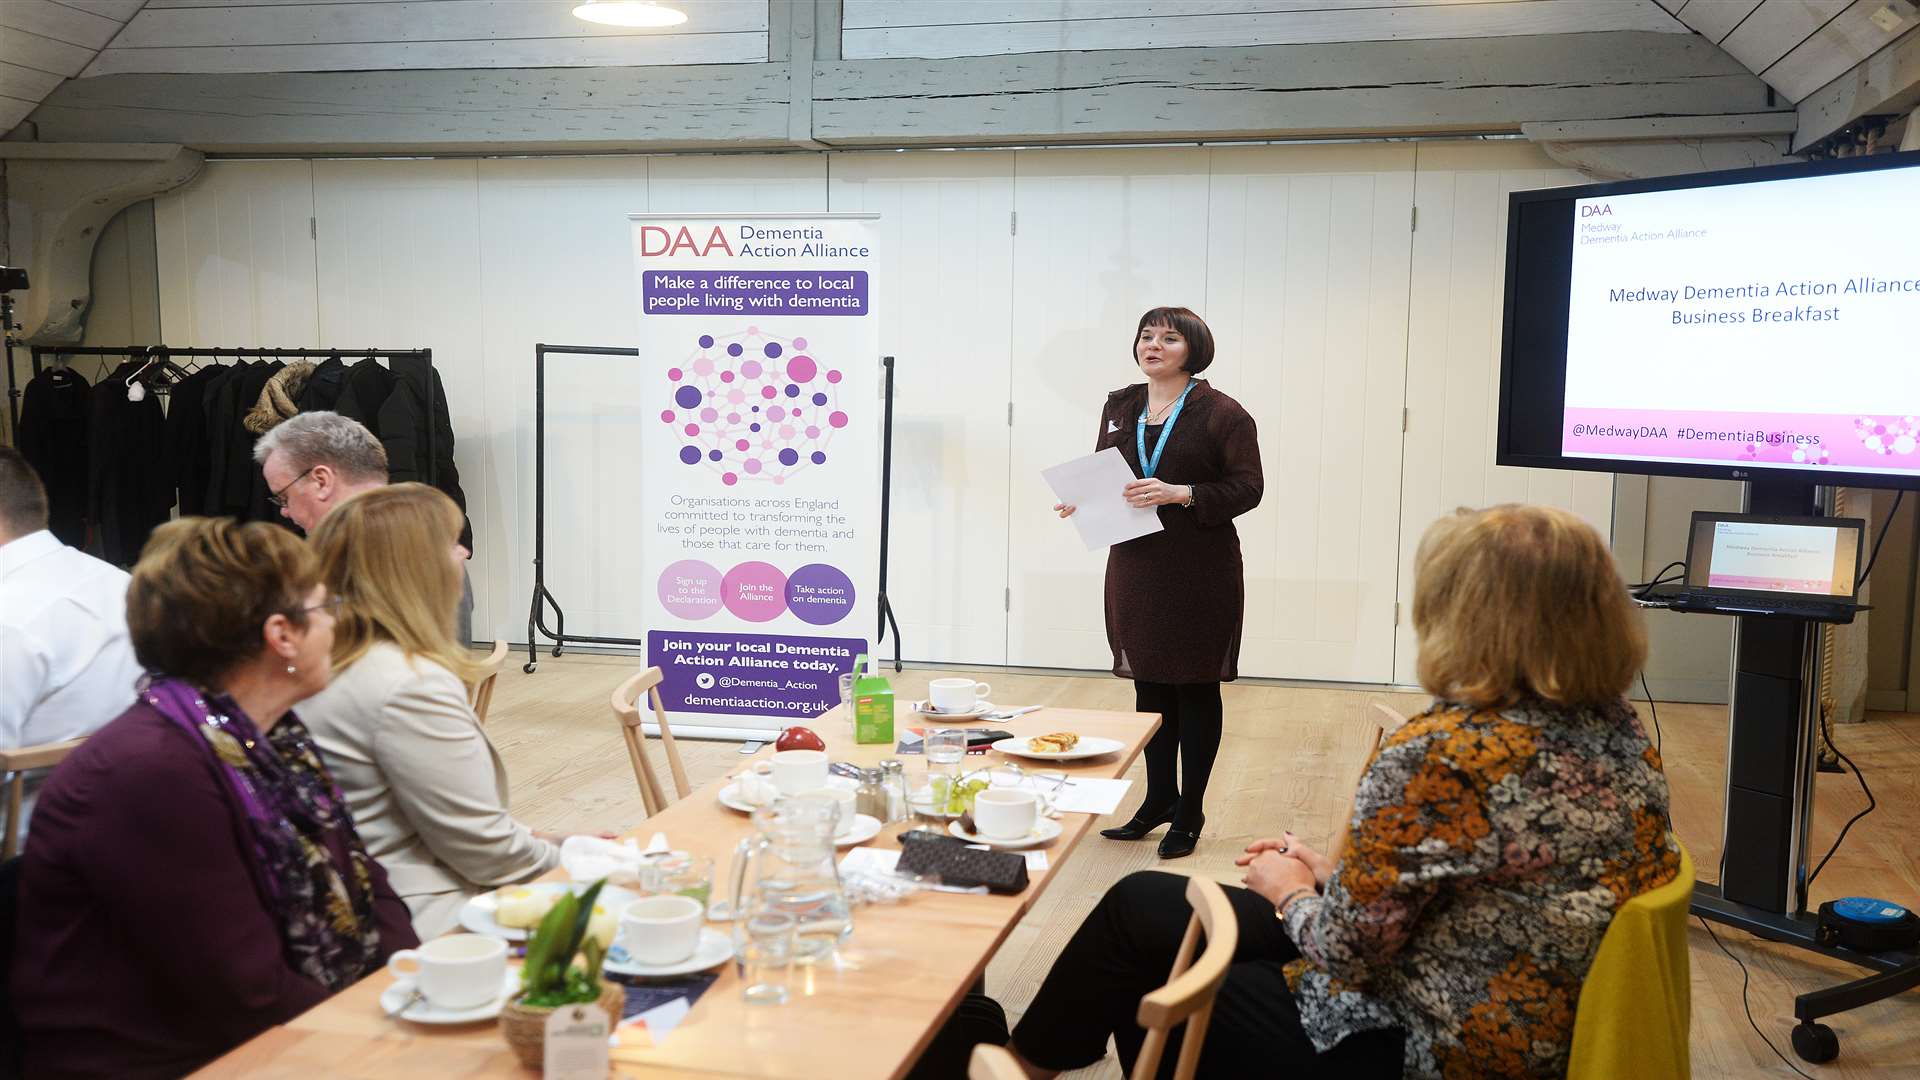 Katie Antill of Alzheimer's Society speaks at the Medway Dementia Action Alliance business breakfast. Picture: Al Frank Monk Photography